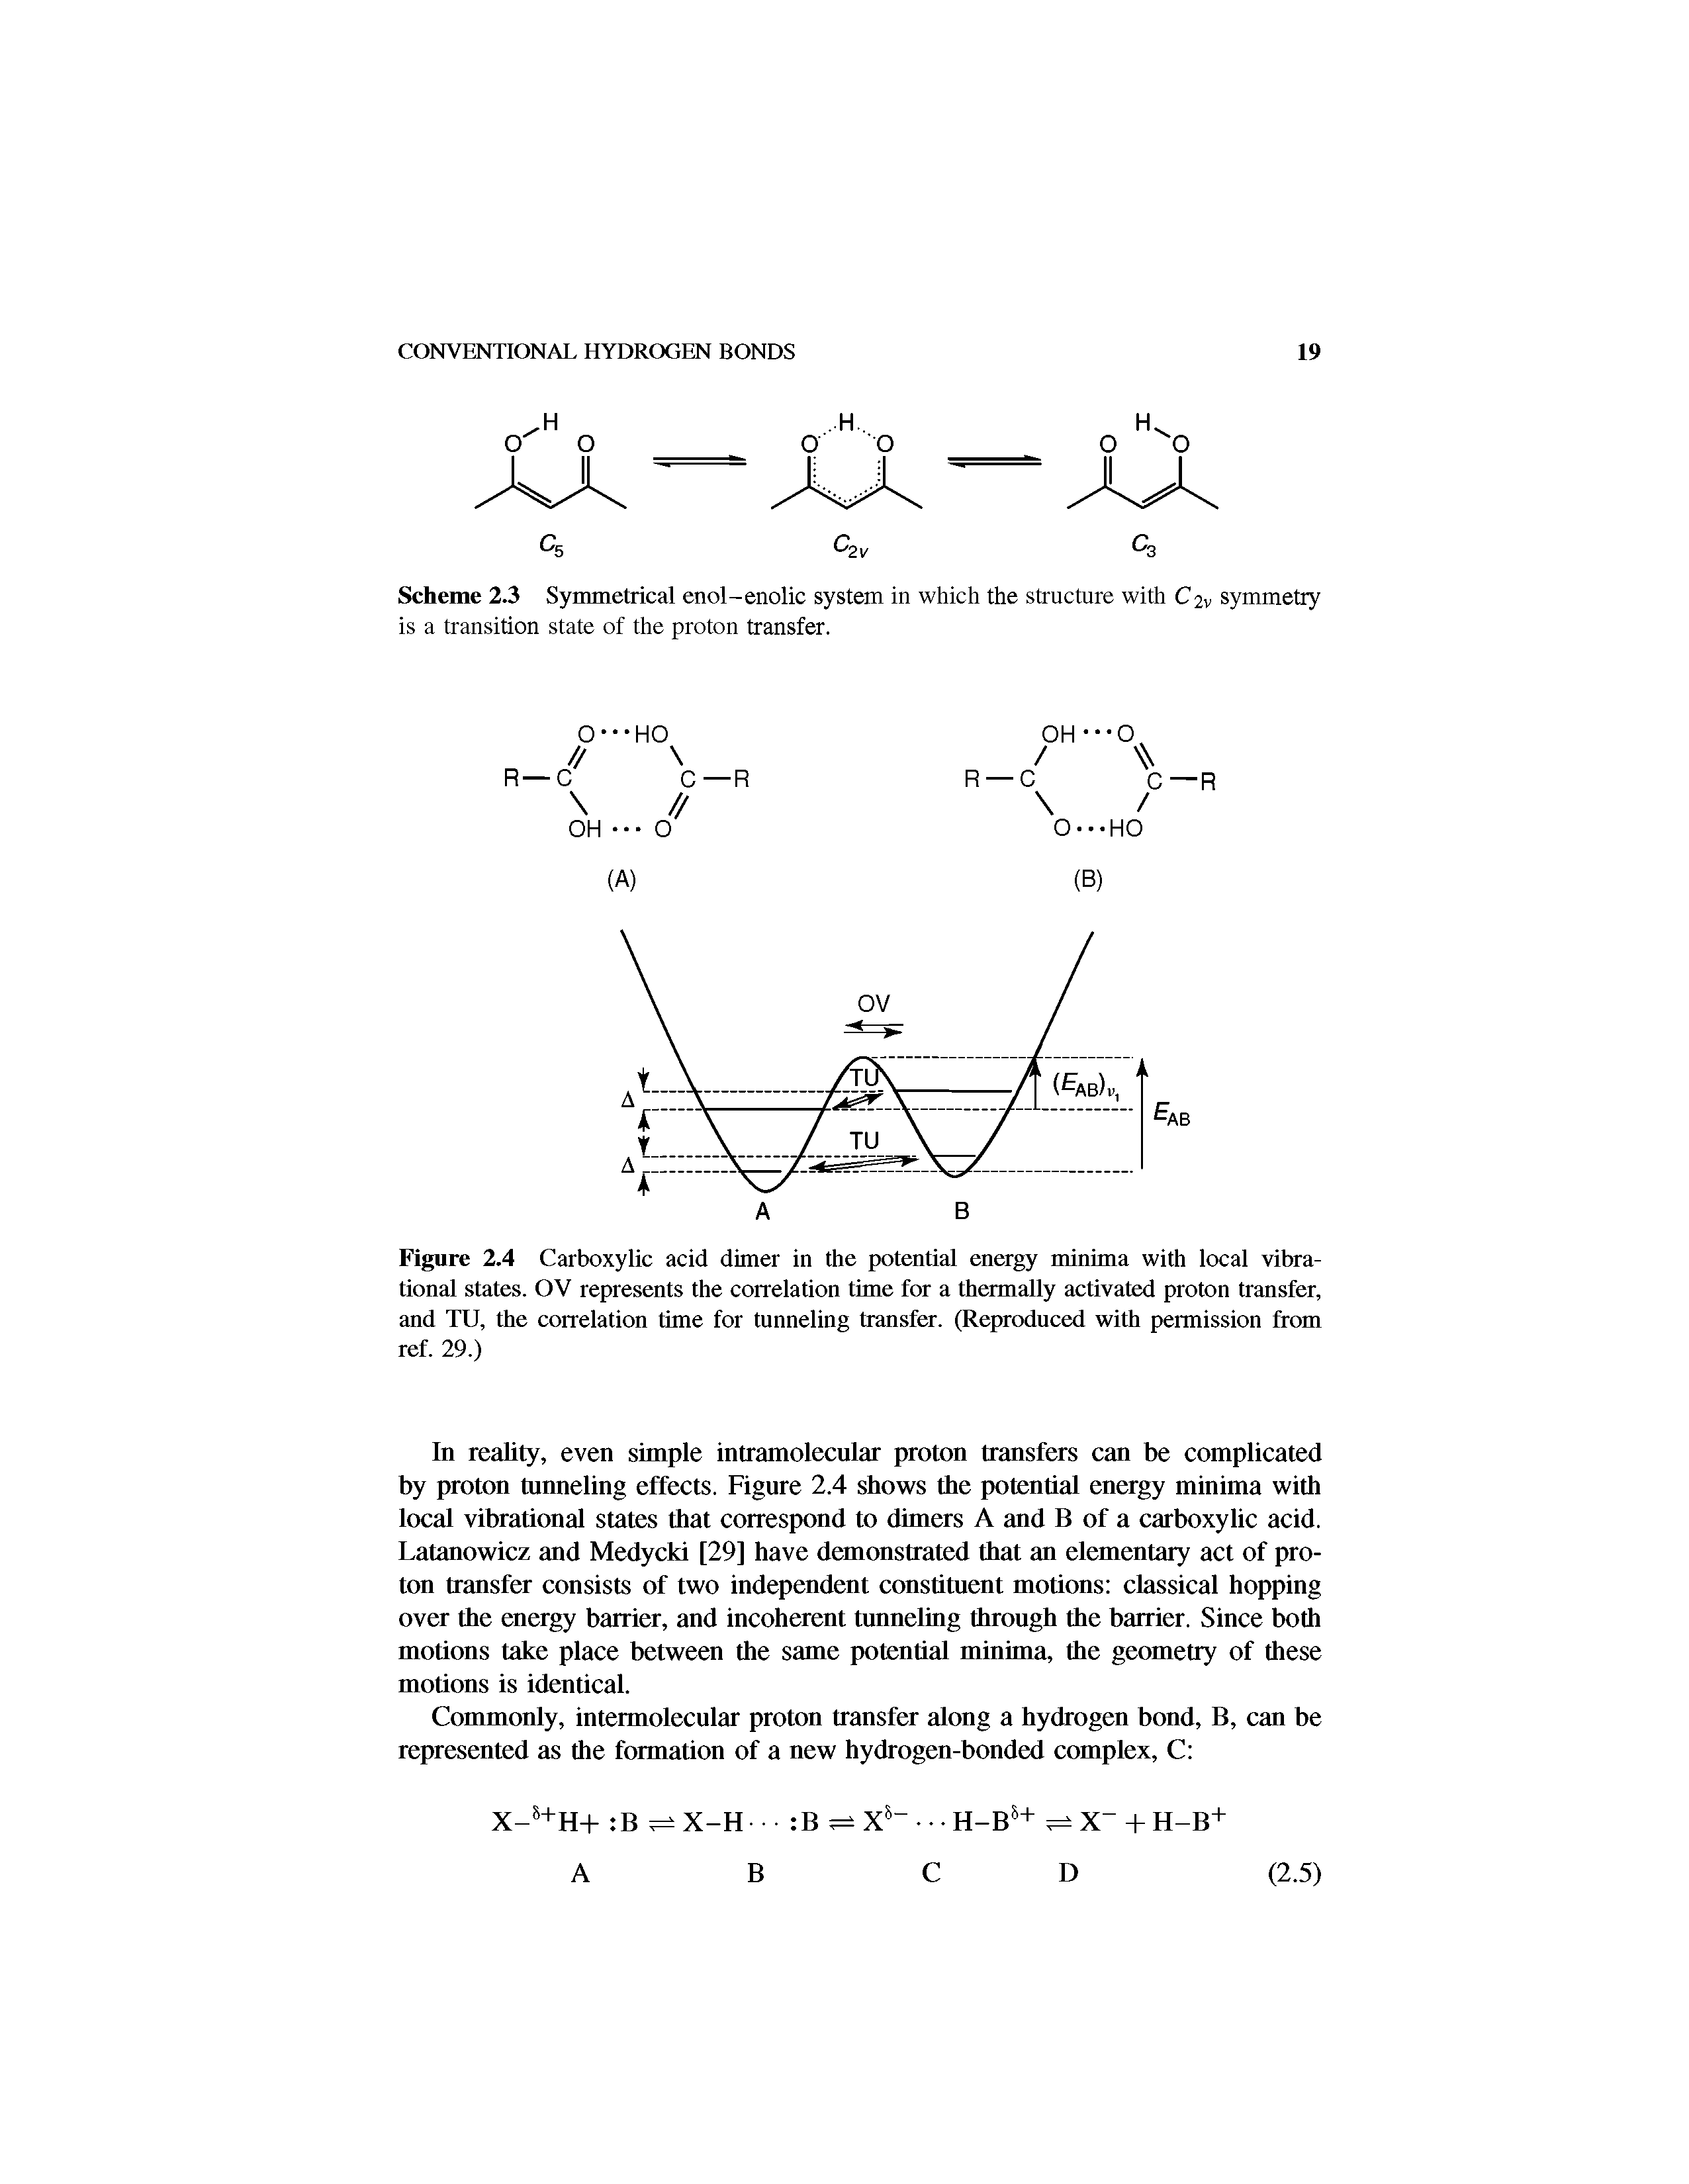 Scheme 2.3 Symmetrical enol-enolic system in which the structure with symmetry is a transition state of the proton transfer.